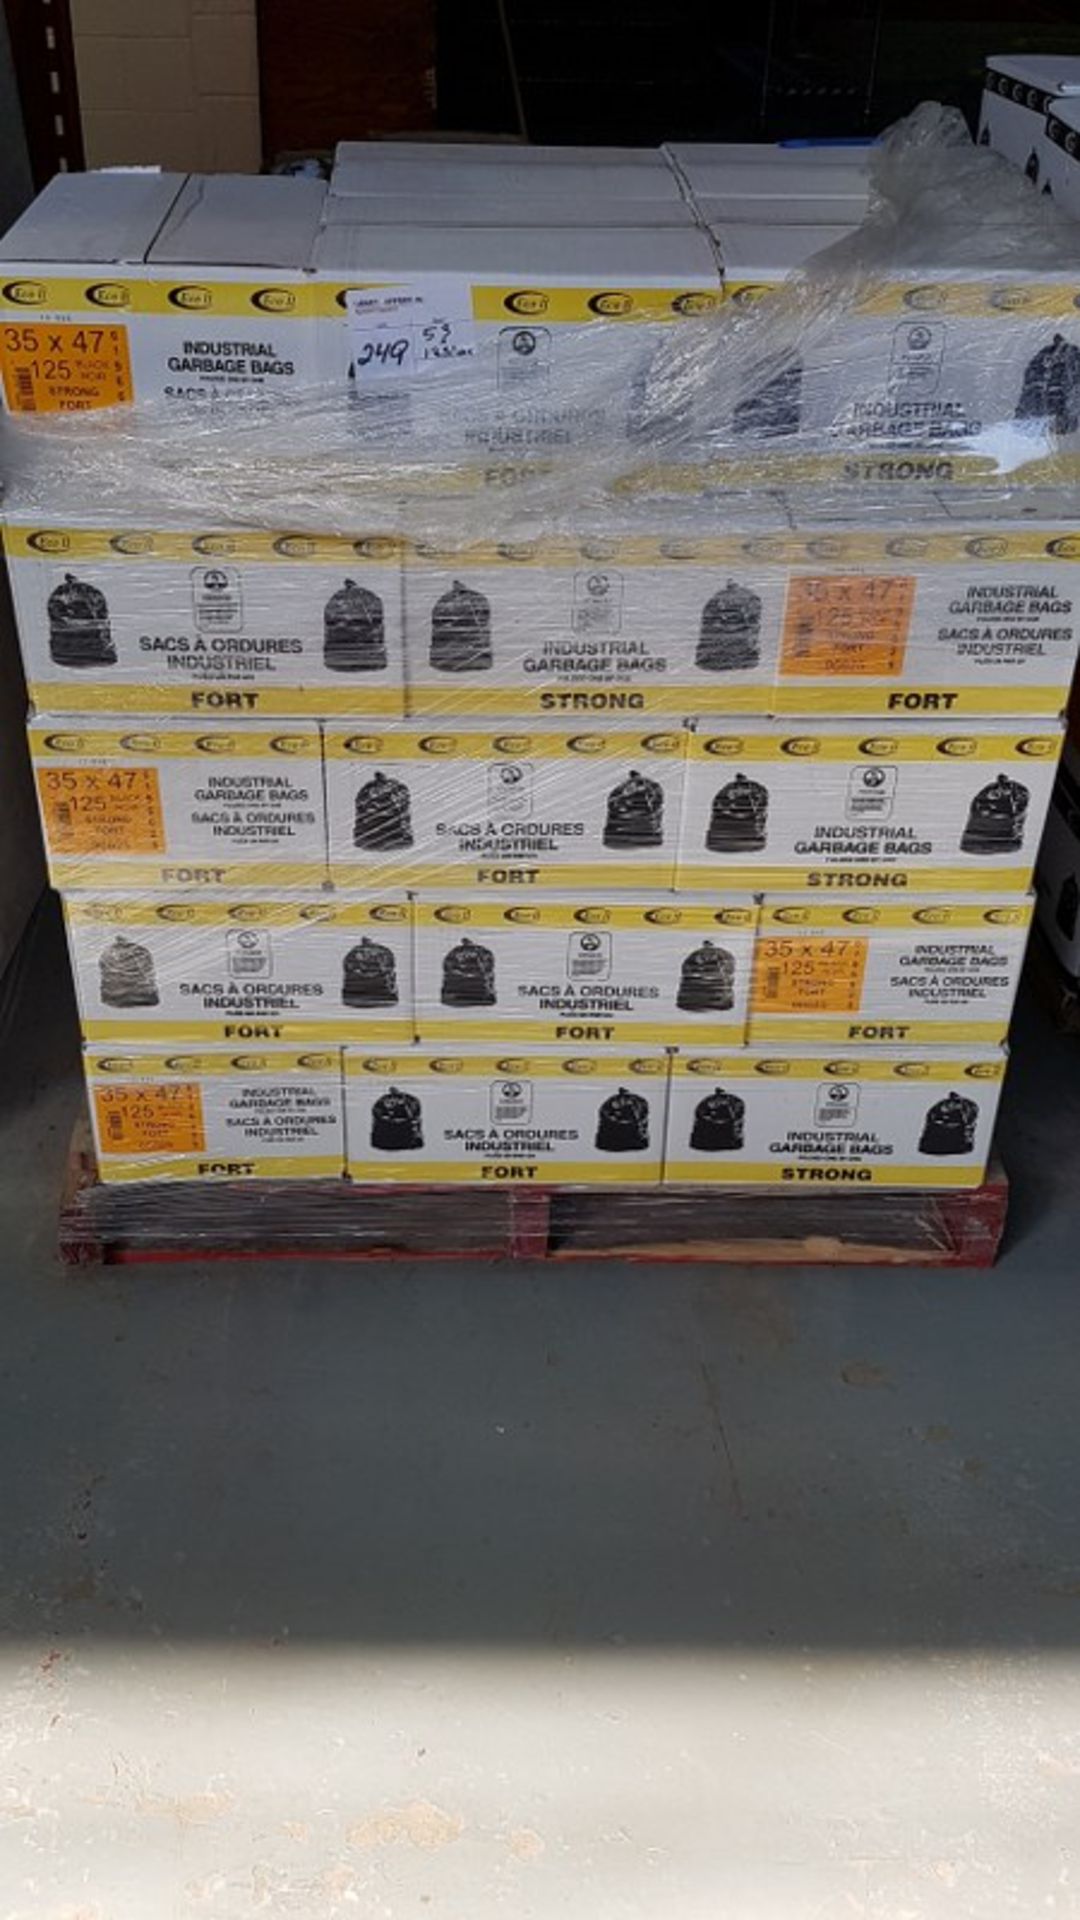 ECO II INDUSTRIAL GARBAGE BAGS (STRONG) 35X47 - 53 BOXES x 125/BOX